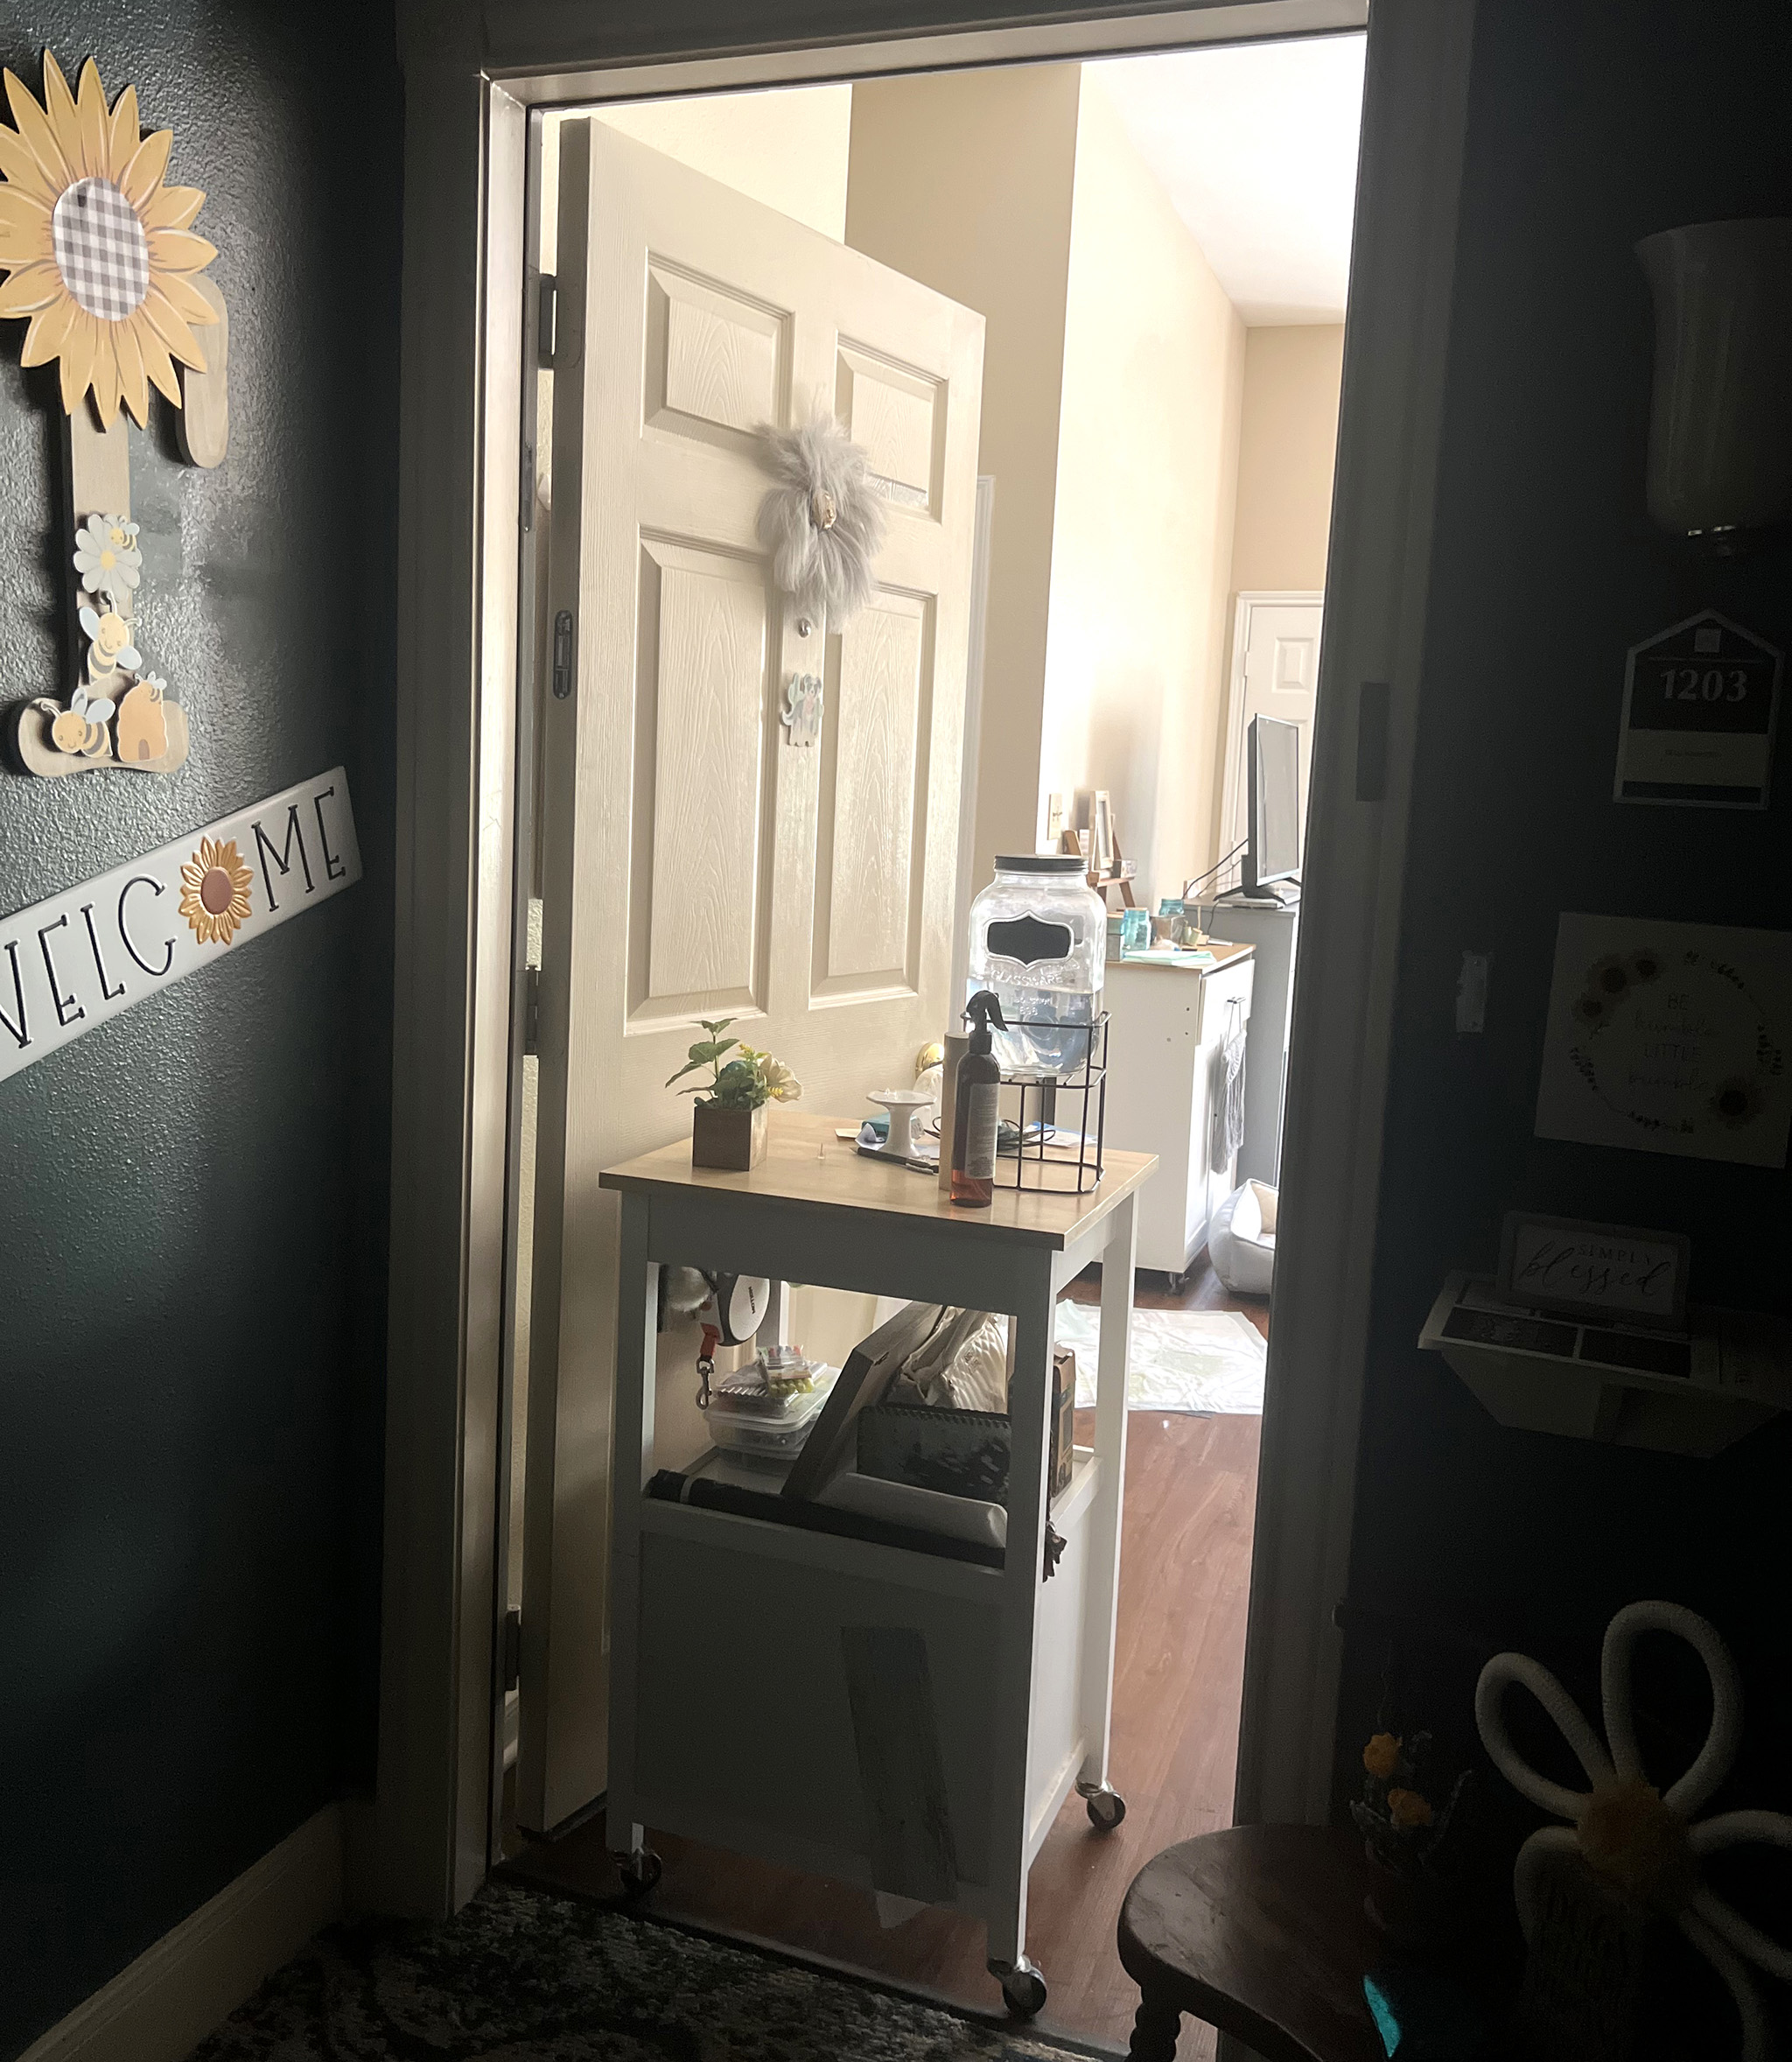 A welcome sign and sunflower hang on a hallway wall next to an open apartment door with a rolling cart holding the door open